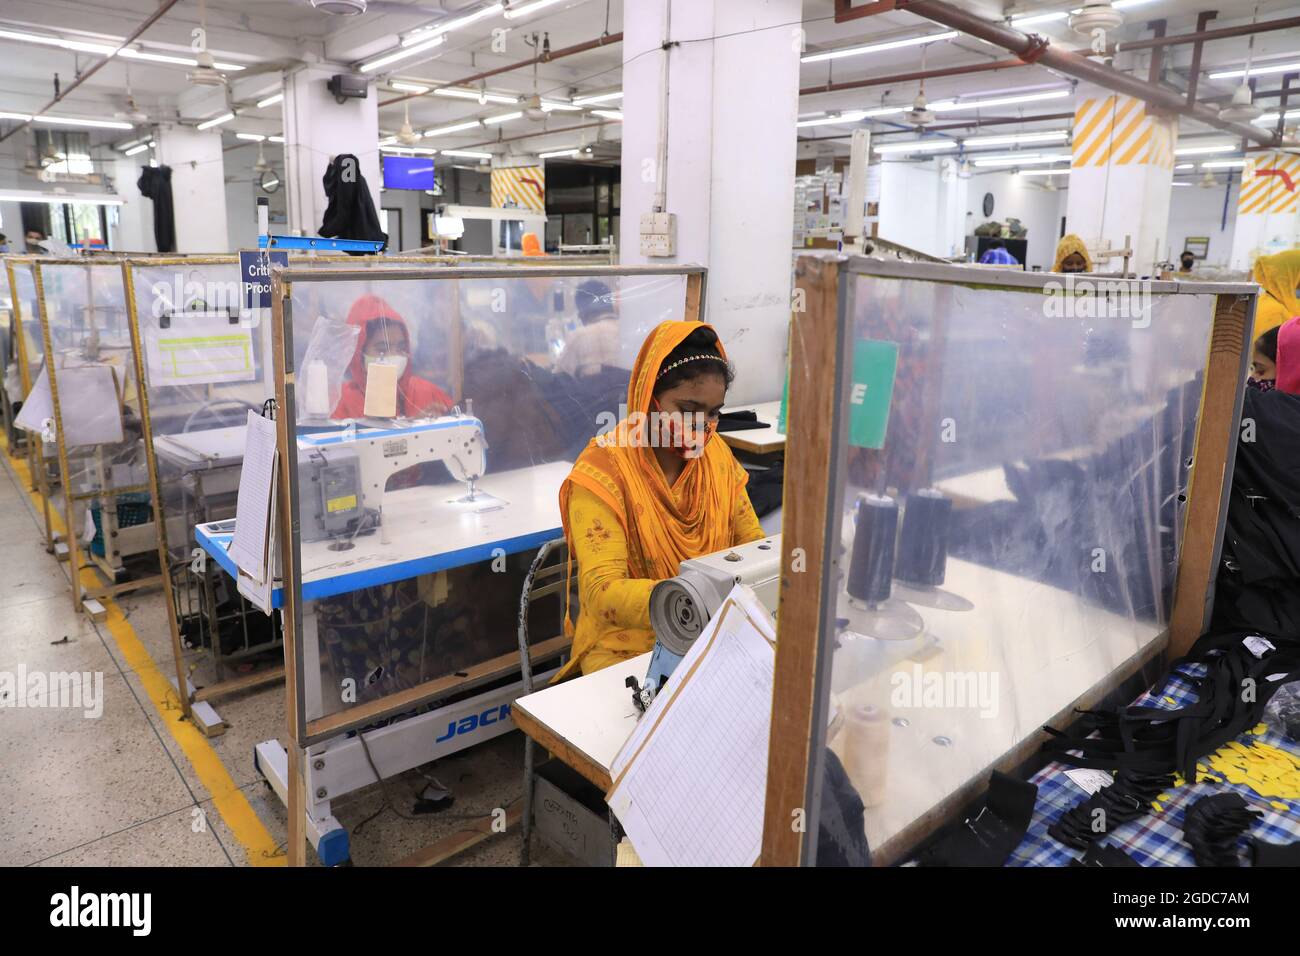 Dhaka, Bangladesh, August 12, 2021: A woman manufactures clothes in a textile factory in the Gazipur industrial zone on the outskirts of Dhaka. Despite the lockdown measures, imposed across the country by the coronavirus, Bangladeshi textile factories have resumed production of clothing, which They supply the most important brands in the world and represent 84% of the country's total exports. Bangladesh is one of the largest textile exporters in the world employing more than 4 million people, most of them women. Bangladesh's labor force is one of the cheapest in the region, and as a result, it Stock Photo